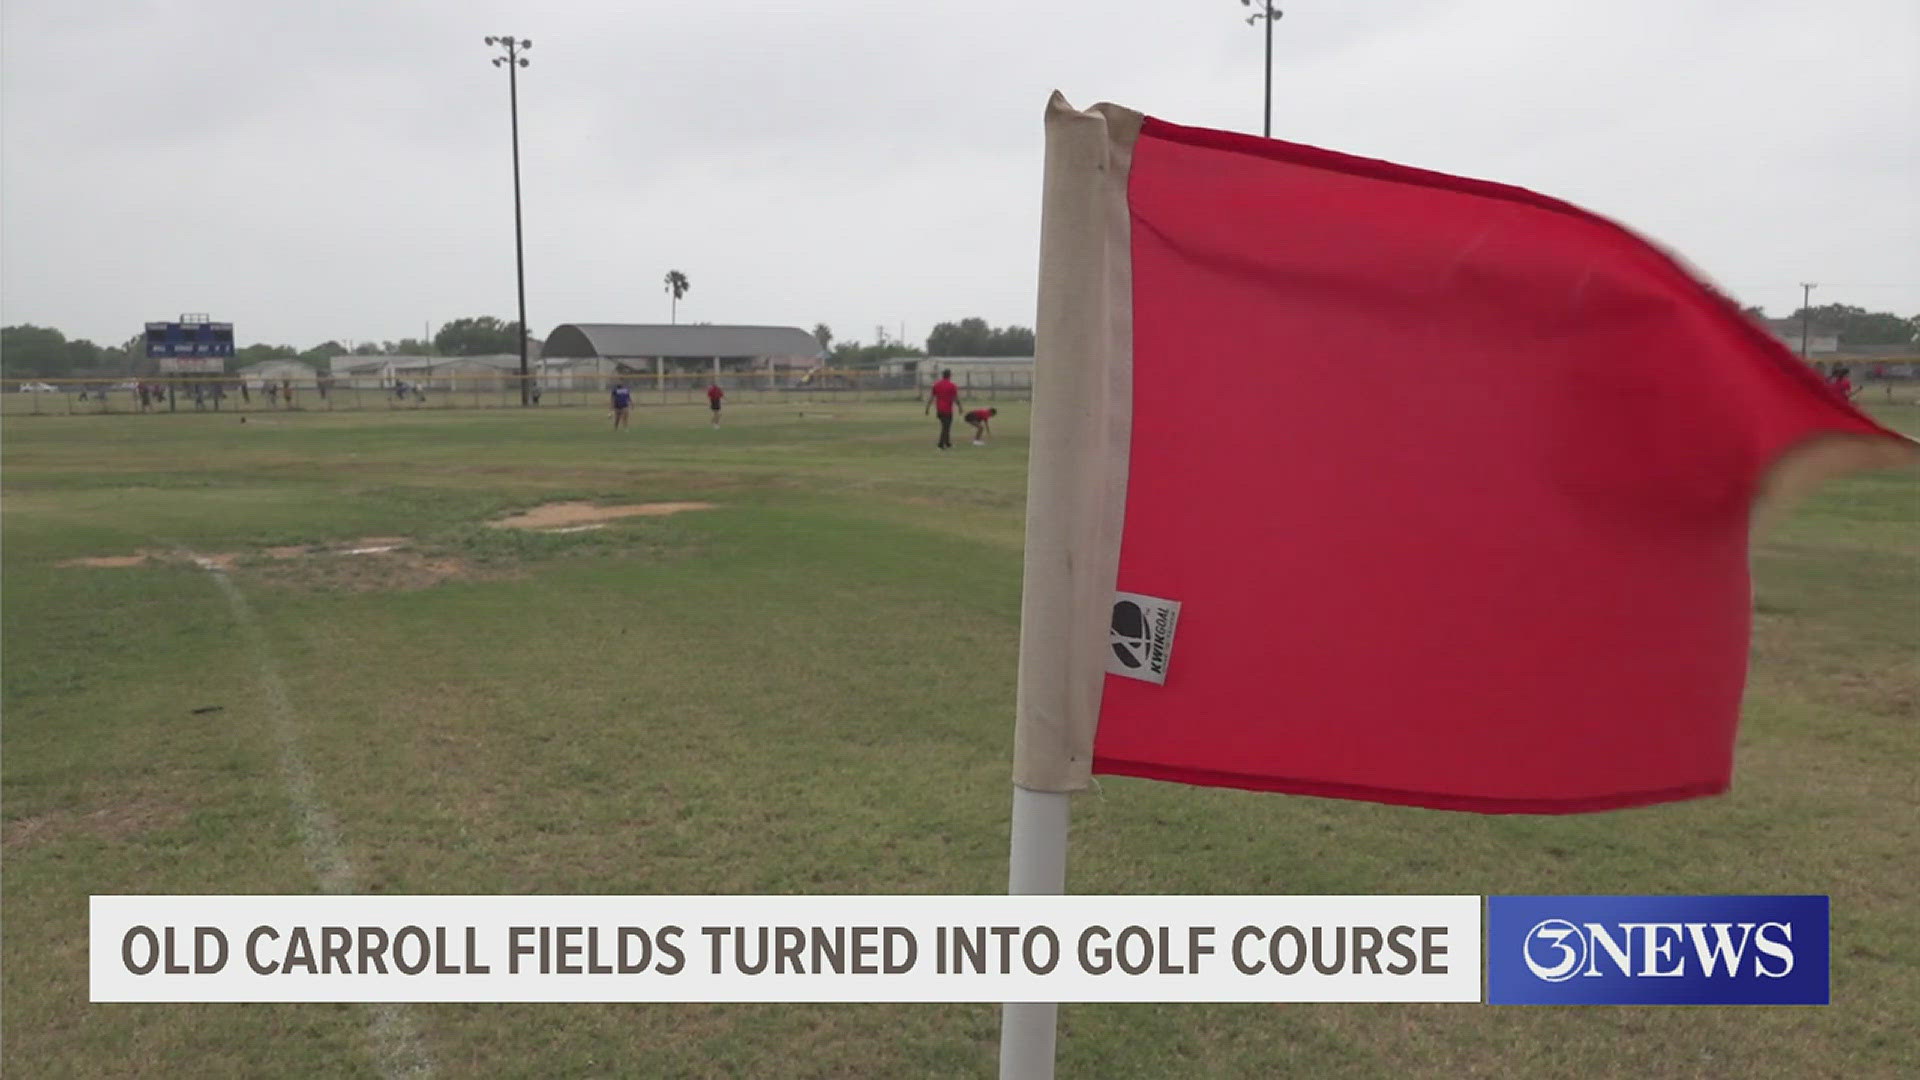 The golf course was created across the baseball, softball, football and practice fields.